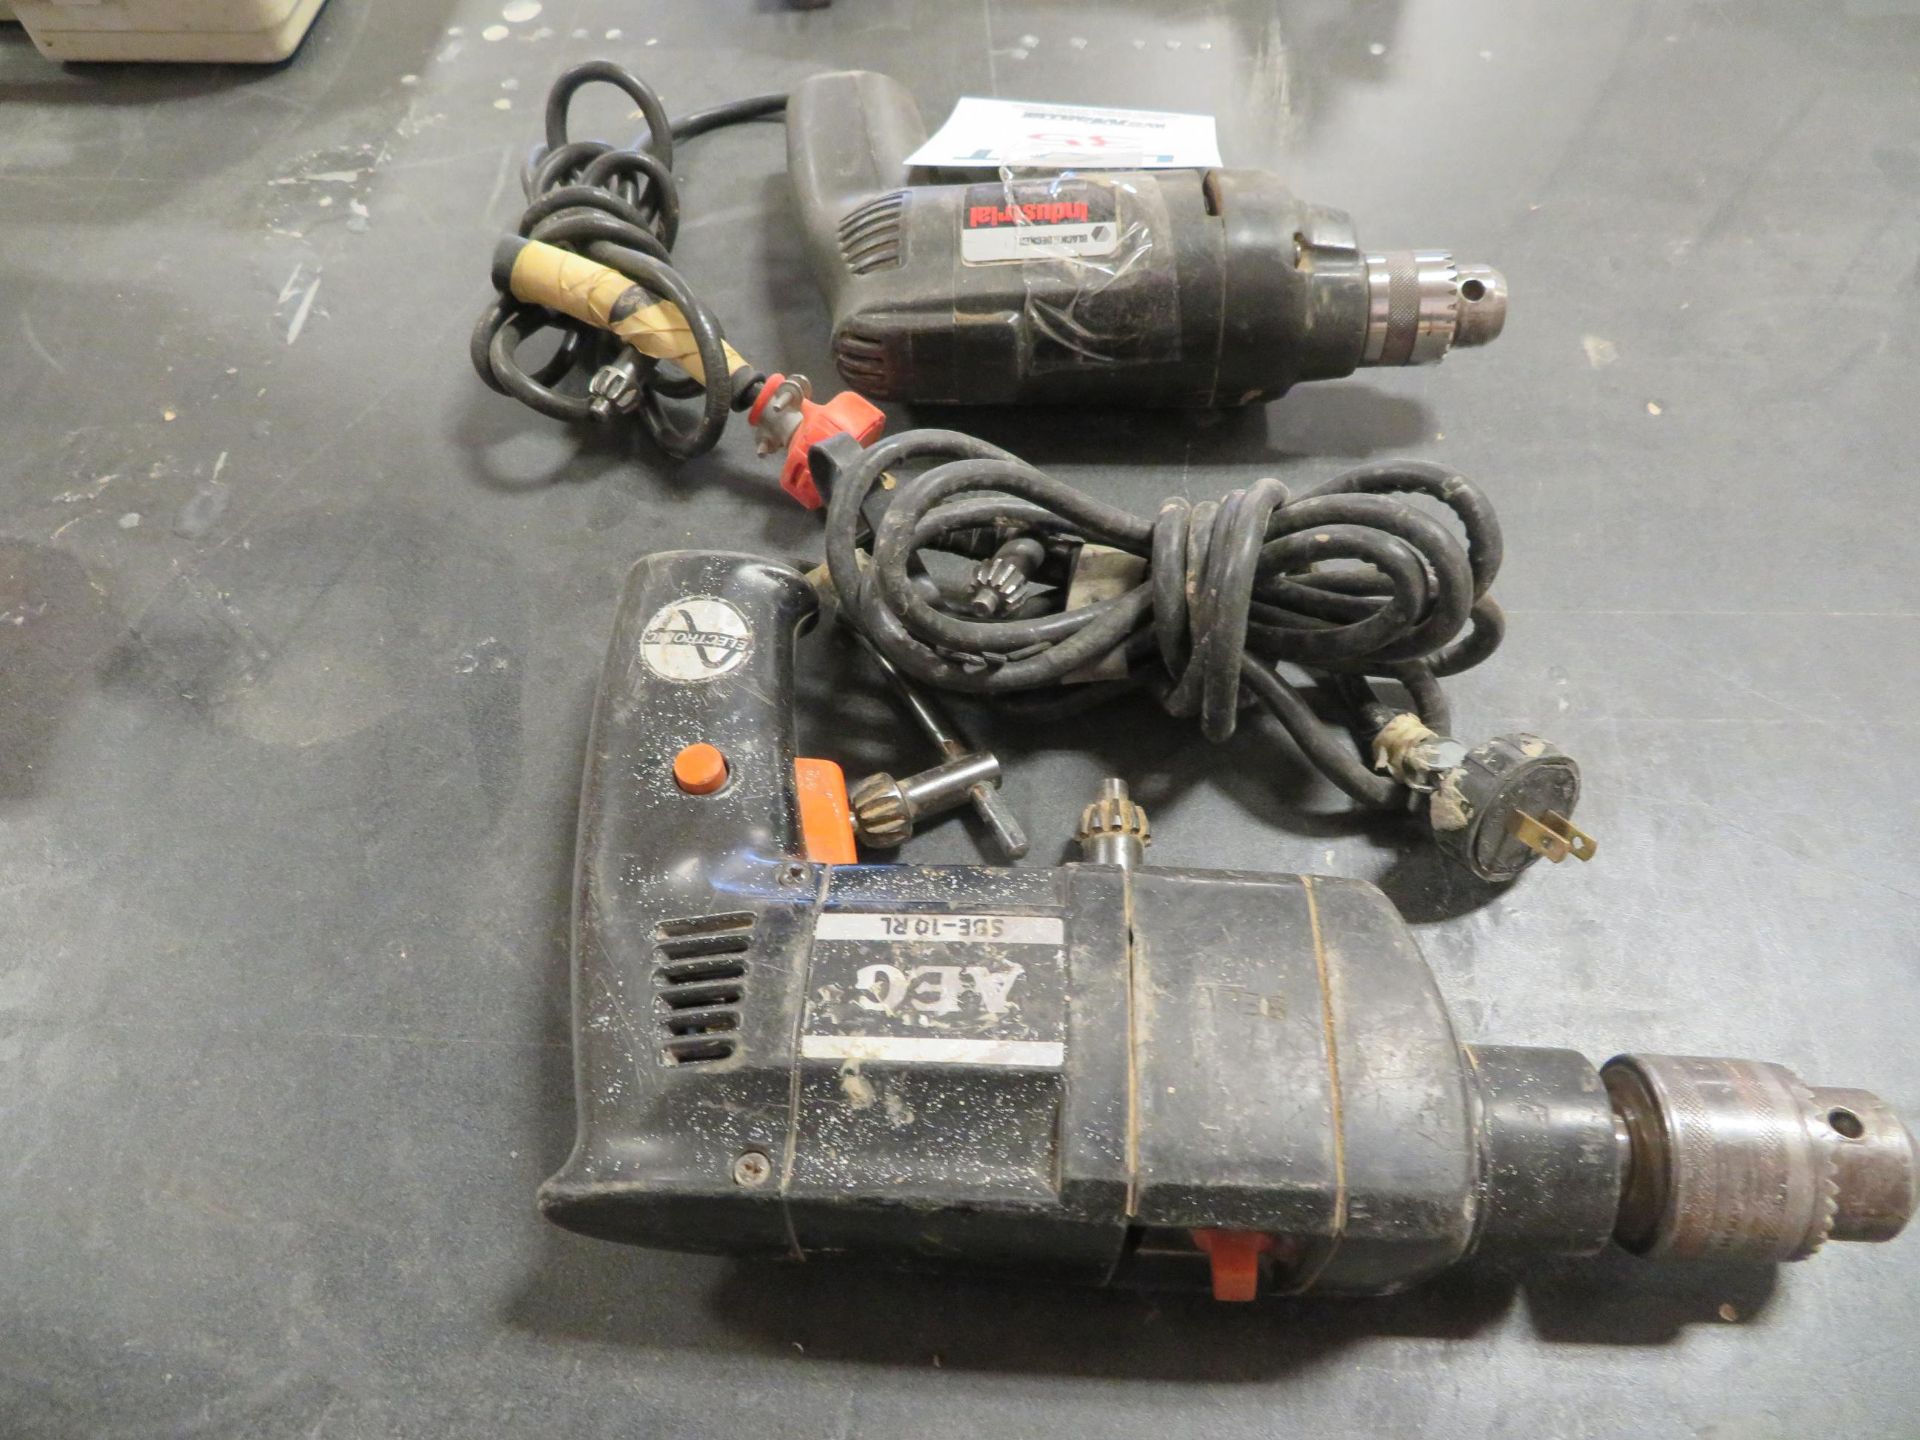 LOT including BLACK & DECKER and AEG drills (qty 2) - Image 2 of 2